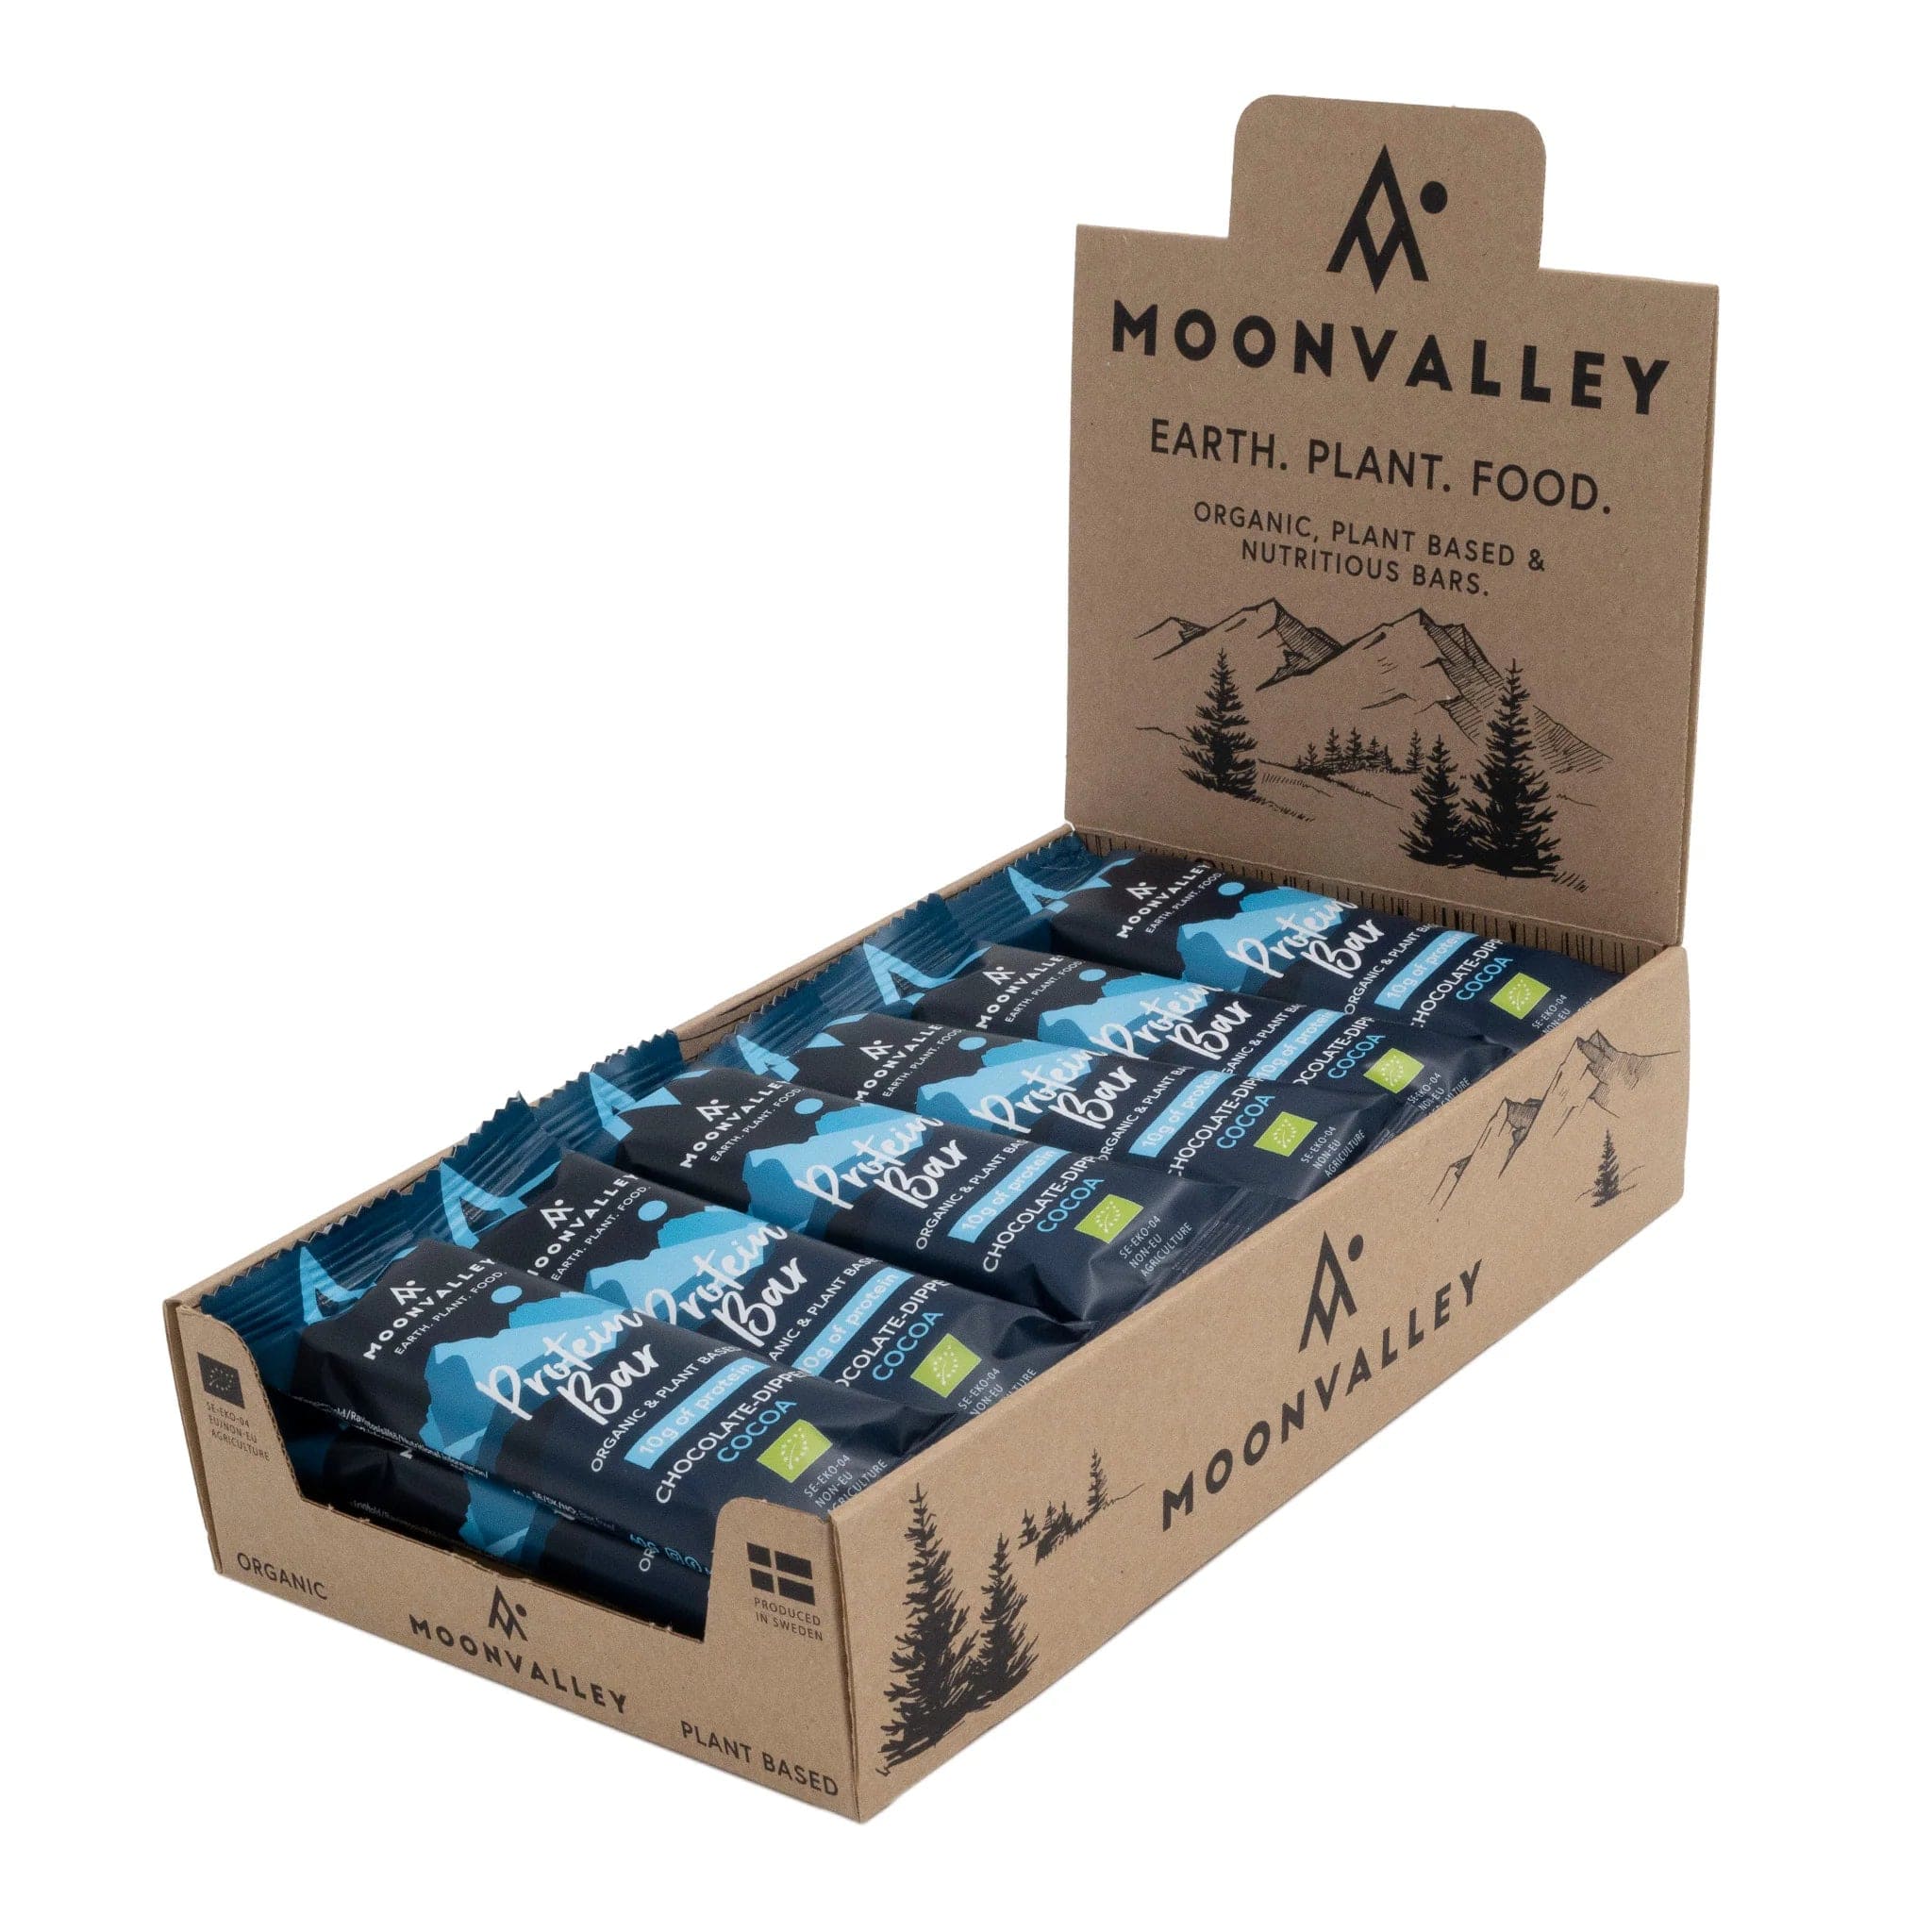 Moonvalley Protein Bar Box of 18 / Cocoa Organic Protein Bar Chocolate-Dipped (60g) XMiles